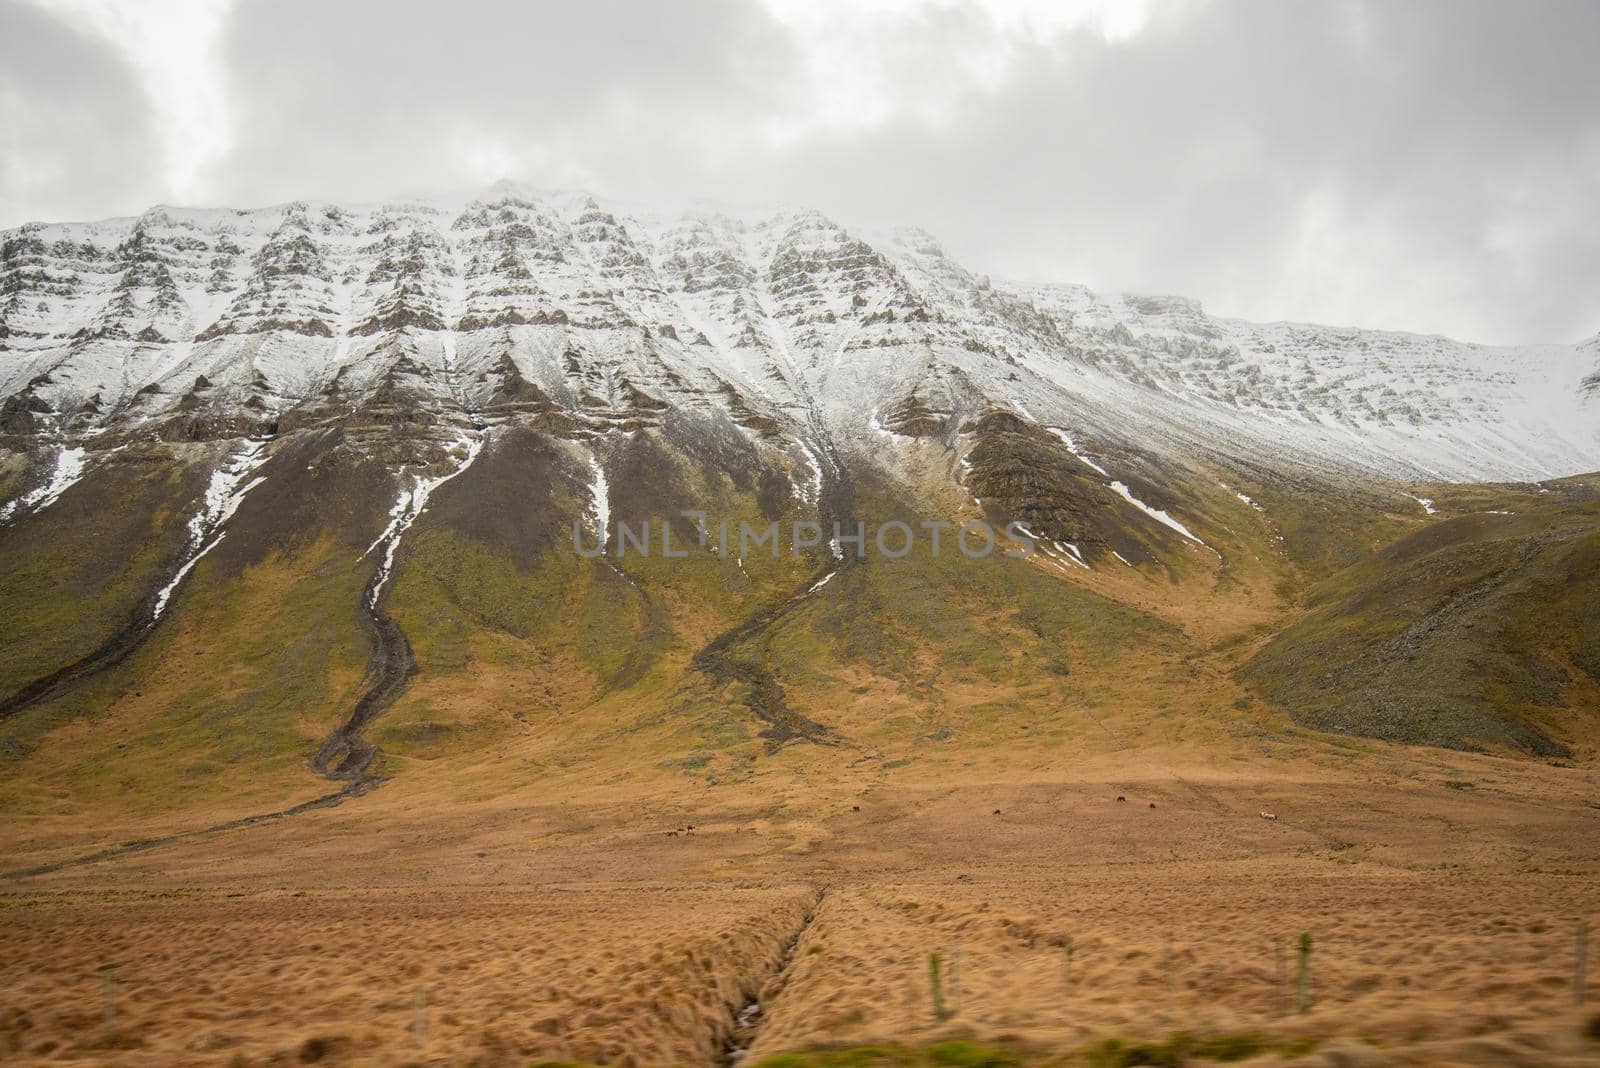 Snow covers Icelandic mountain's unique texture and layers green brown grassy landscape below by jyurinko